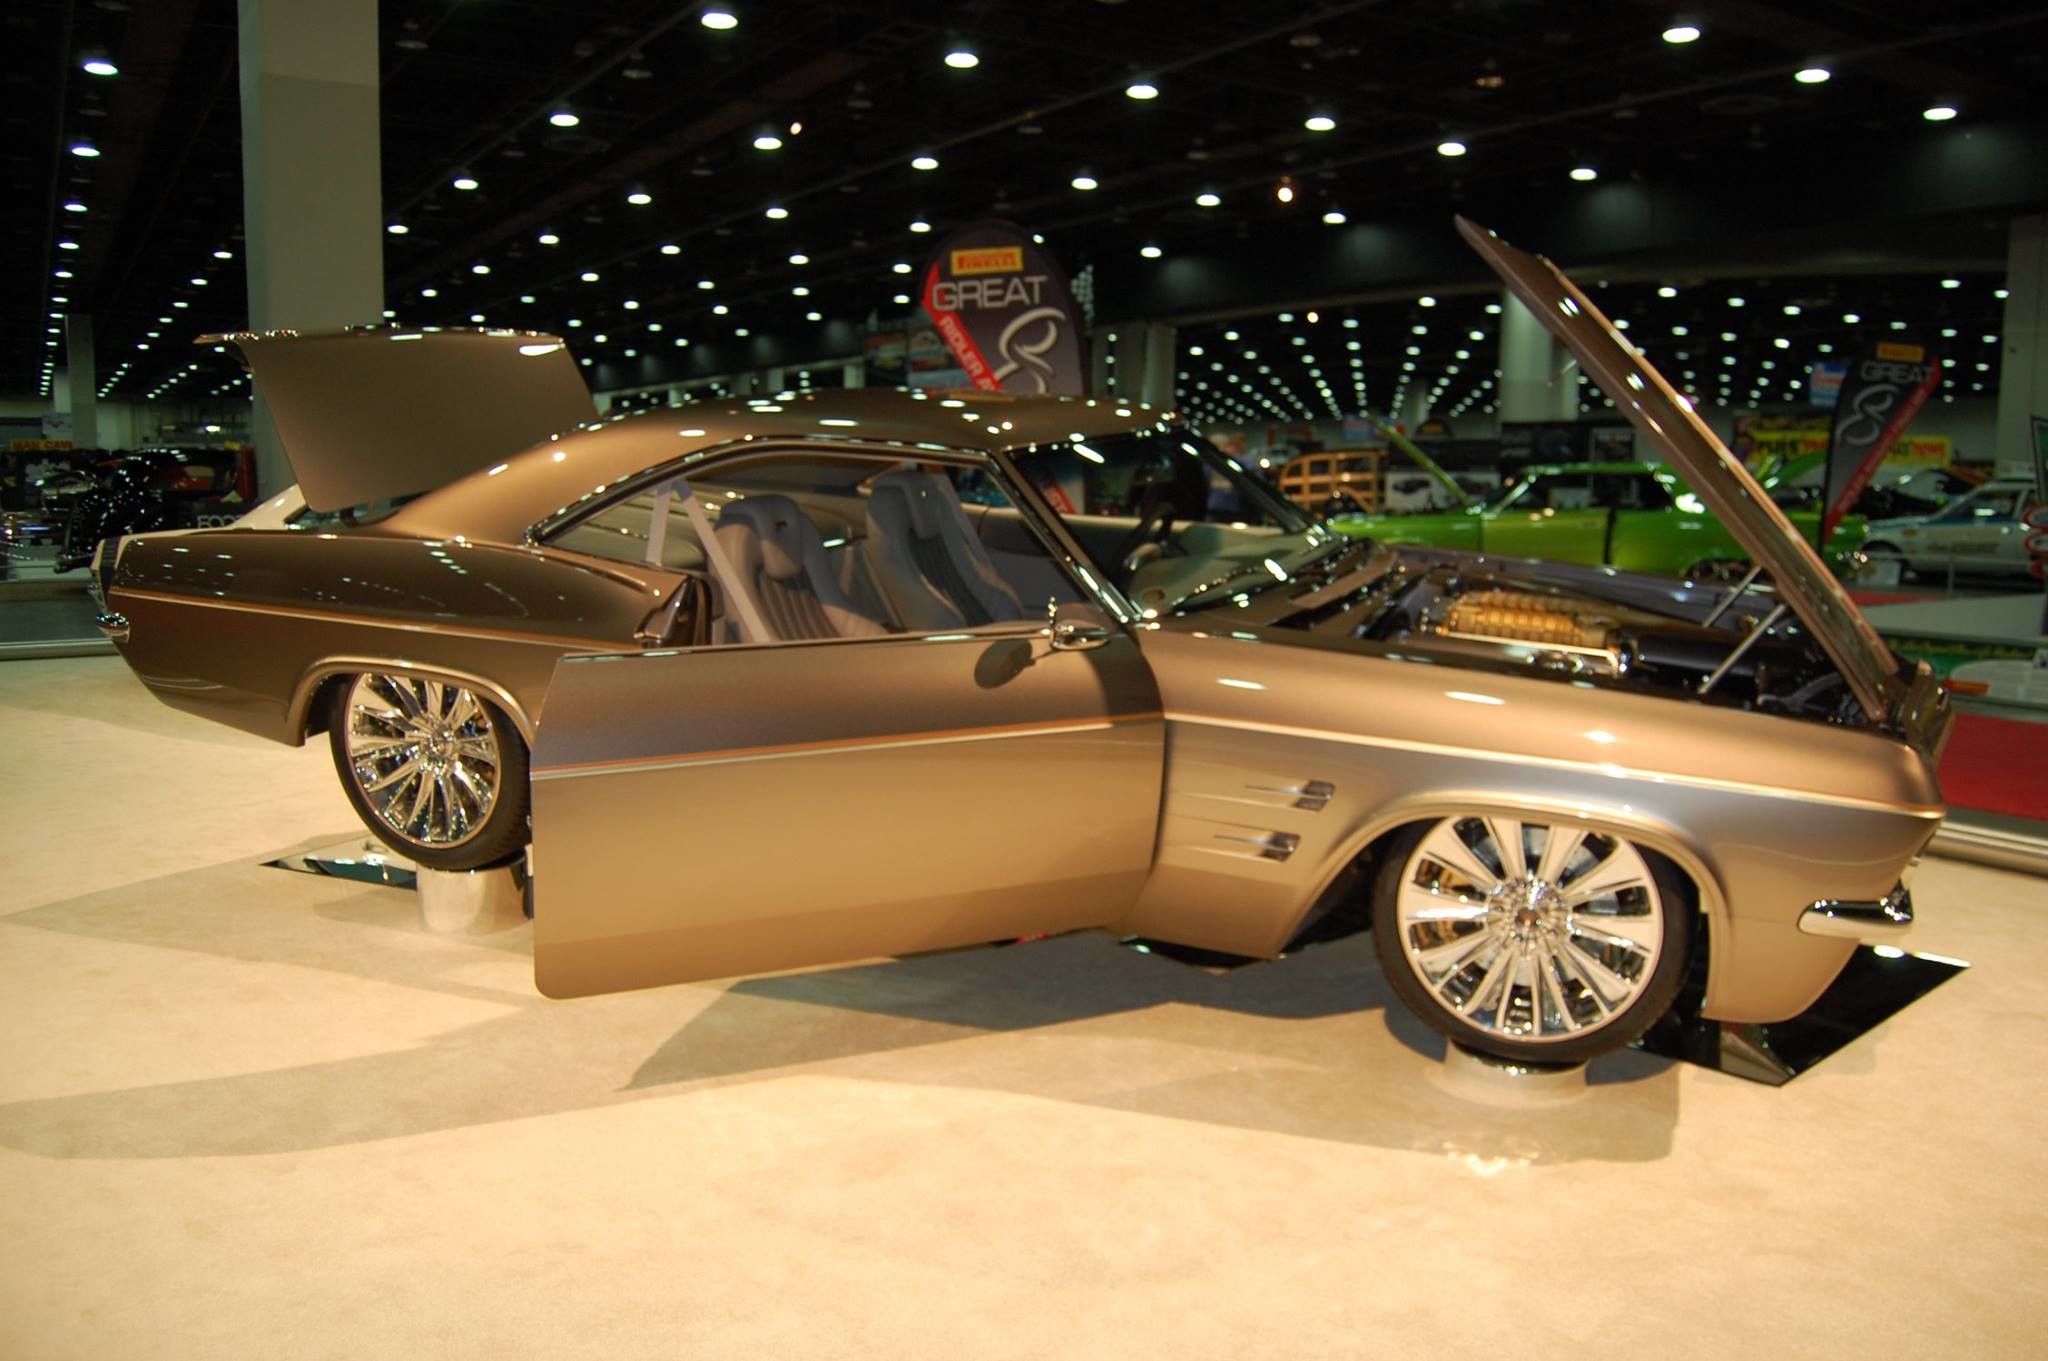 Chip Foose Cadillac Sweet Old Cars Pinterest Chip Foose Cadillac And Eugene O 039 Neill 2048x1361